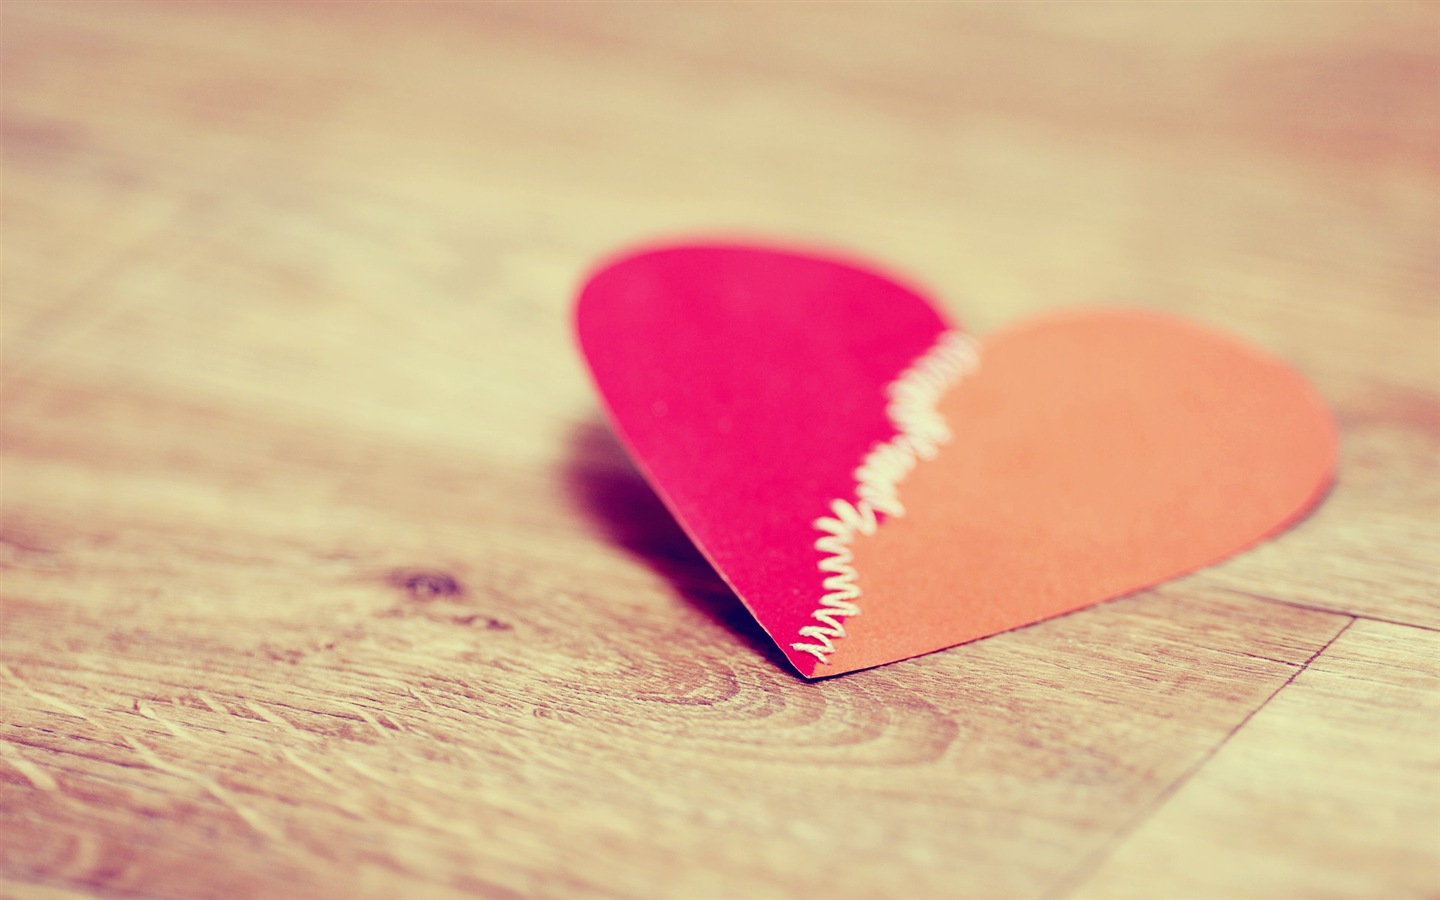 The theme of love, creative heart-shaped HD wallpapers #5 - 1440x900